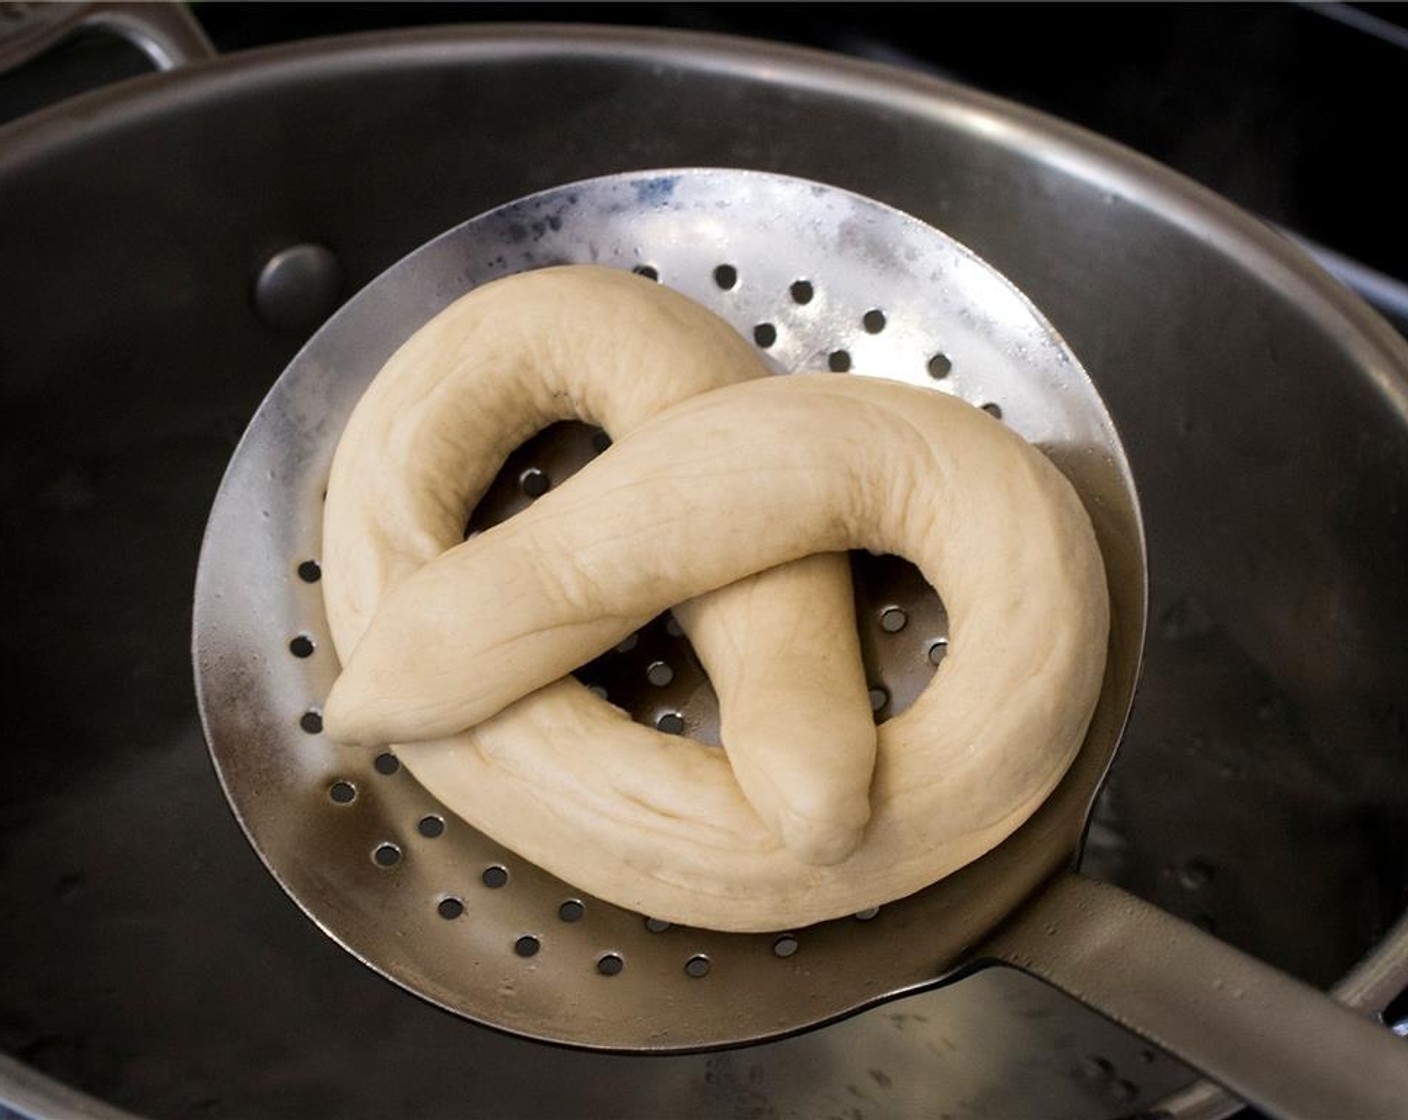 step 10 Transfer the pretzel to the parchment-lined baking sheet and cover with a damp tea towel while you work on the remaining pretzels.